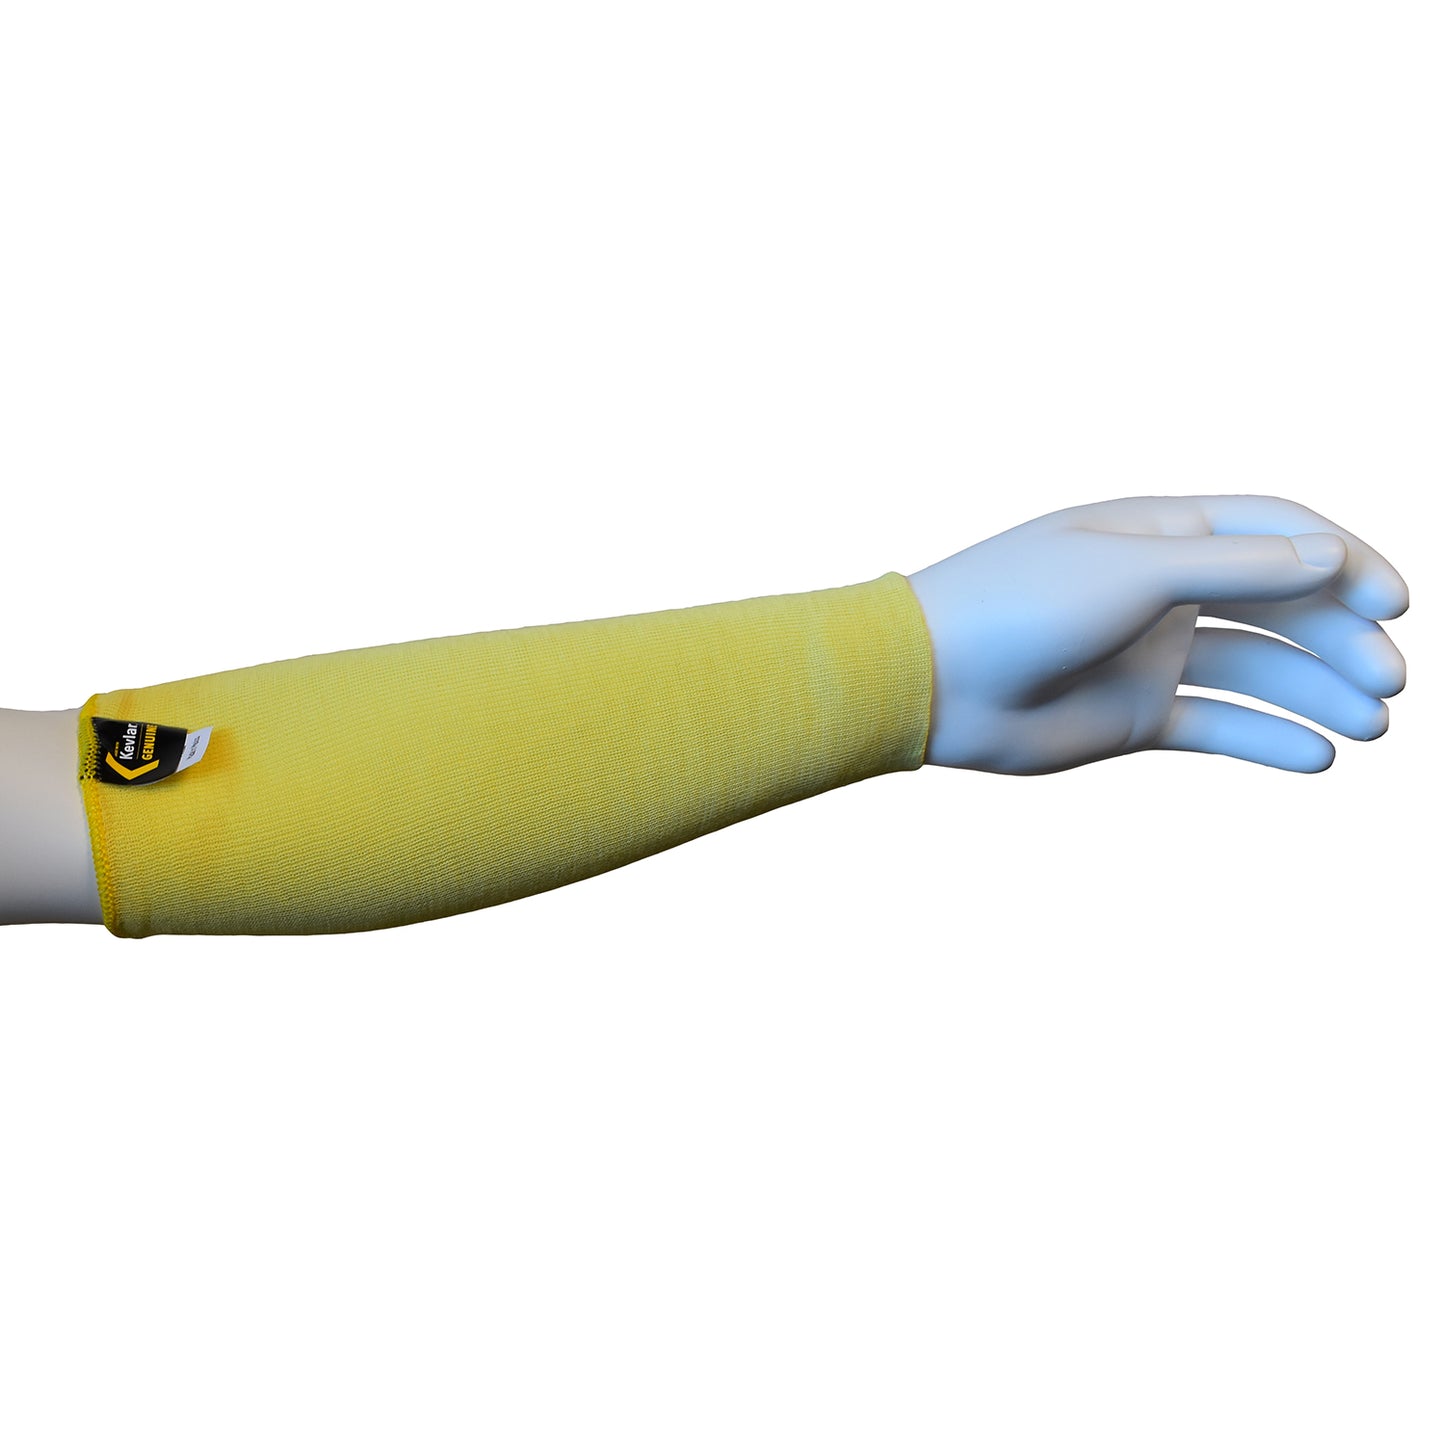 Cut-Resistant Sleeves, 2-Ply Kevlar, ANSI Cut Level A3